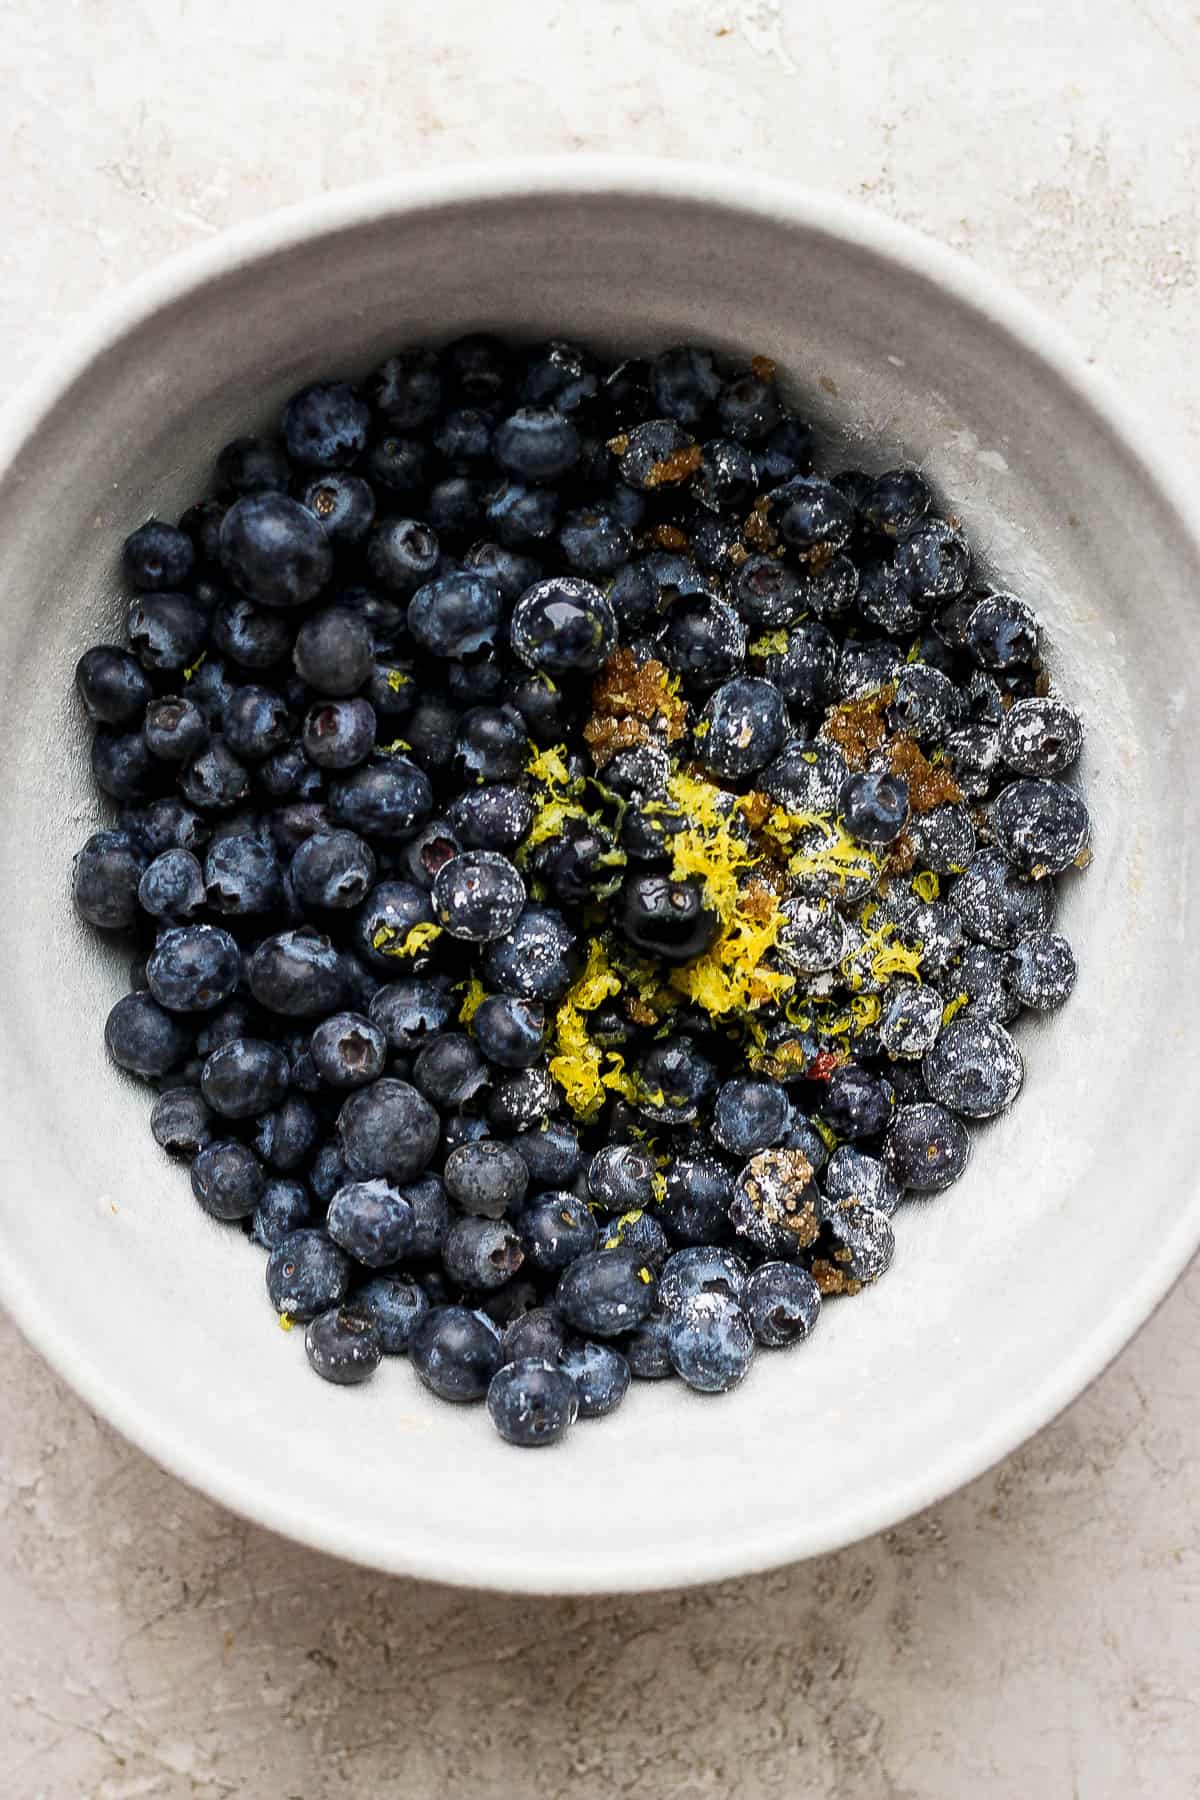 The blueberry mixture in a mixing bowl.